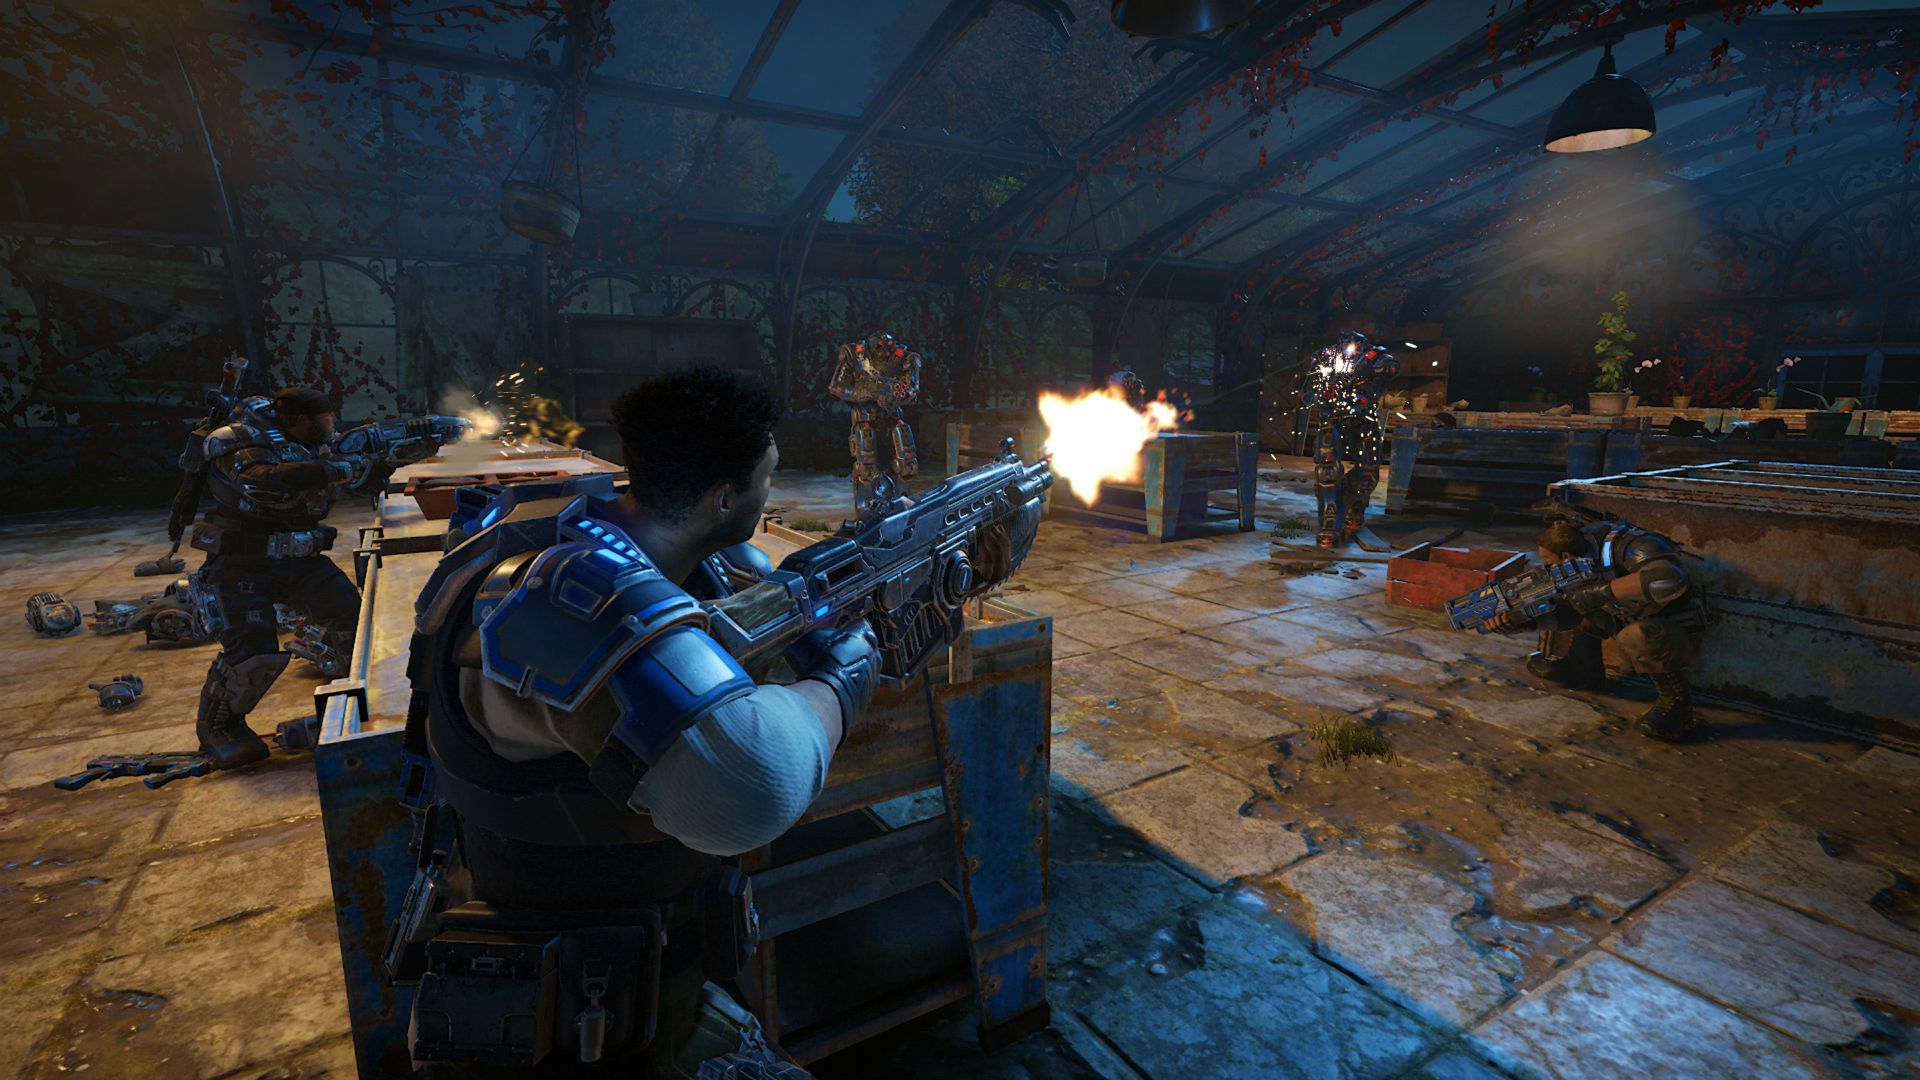 Gears Of War 4' Has Crazy Recommended PC Specs